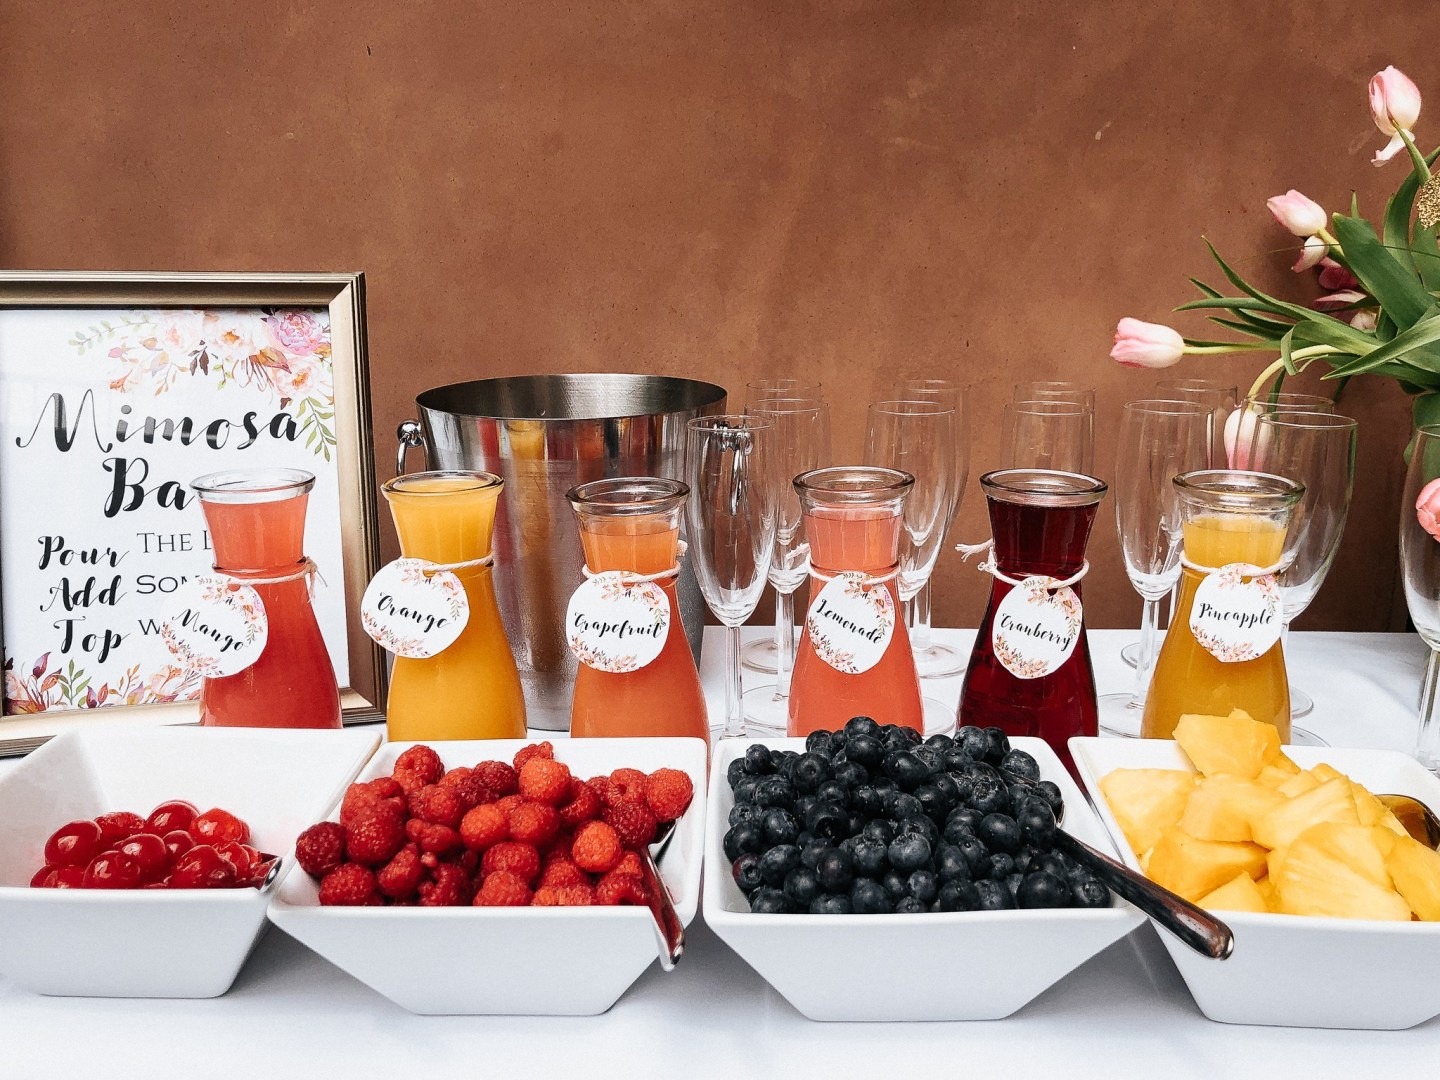 tips-and-checklist-for-setting-up-a-mimosa-bar-adoring-kitchen